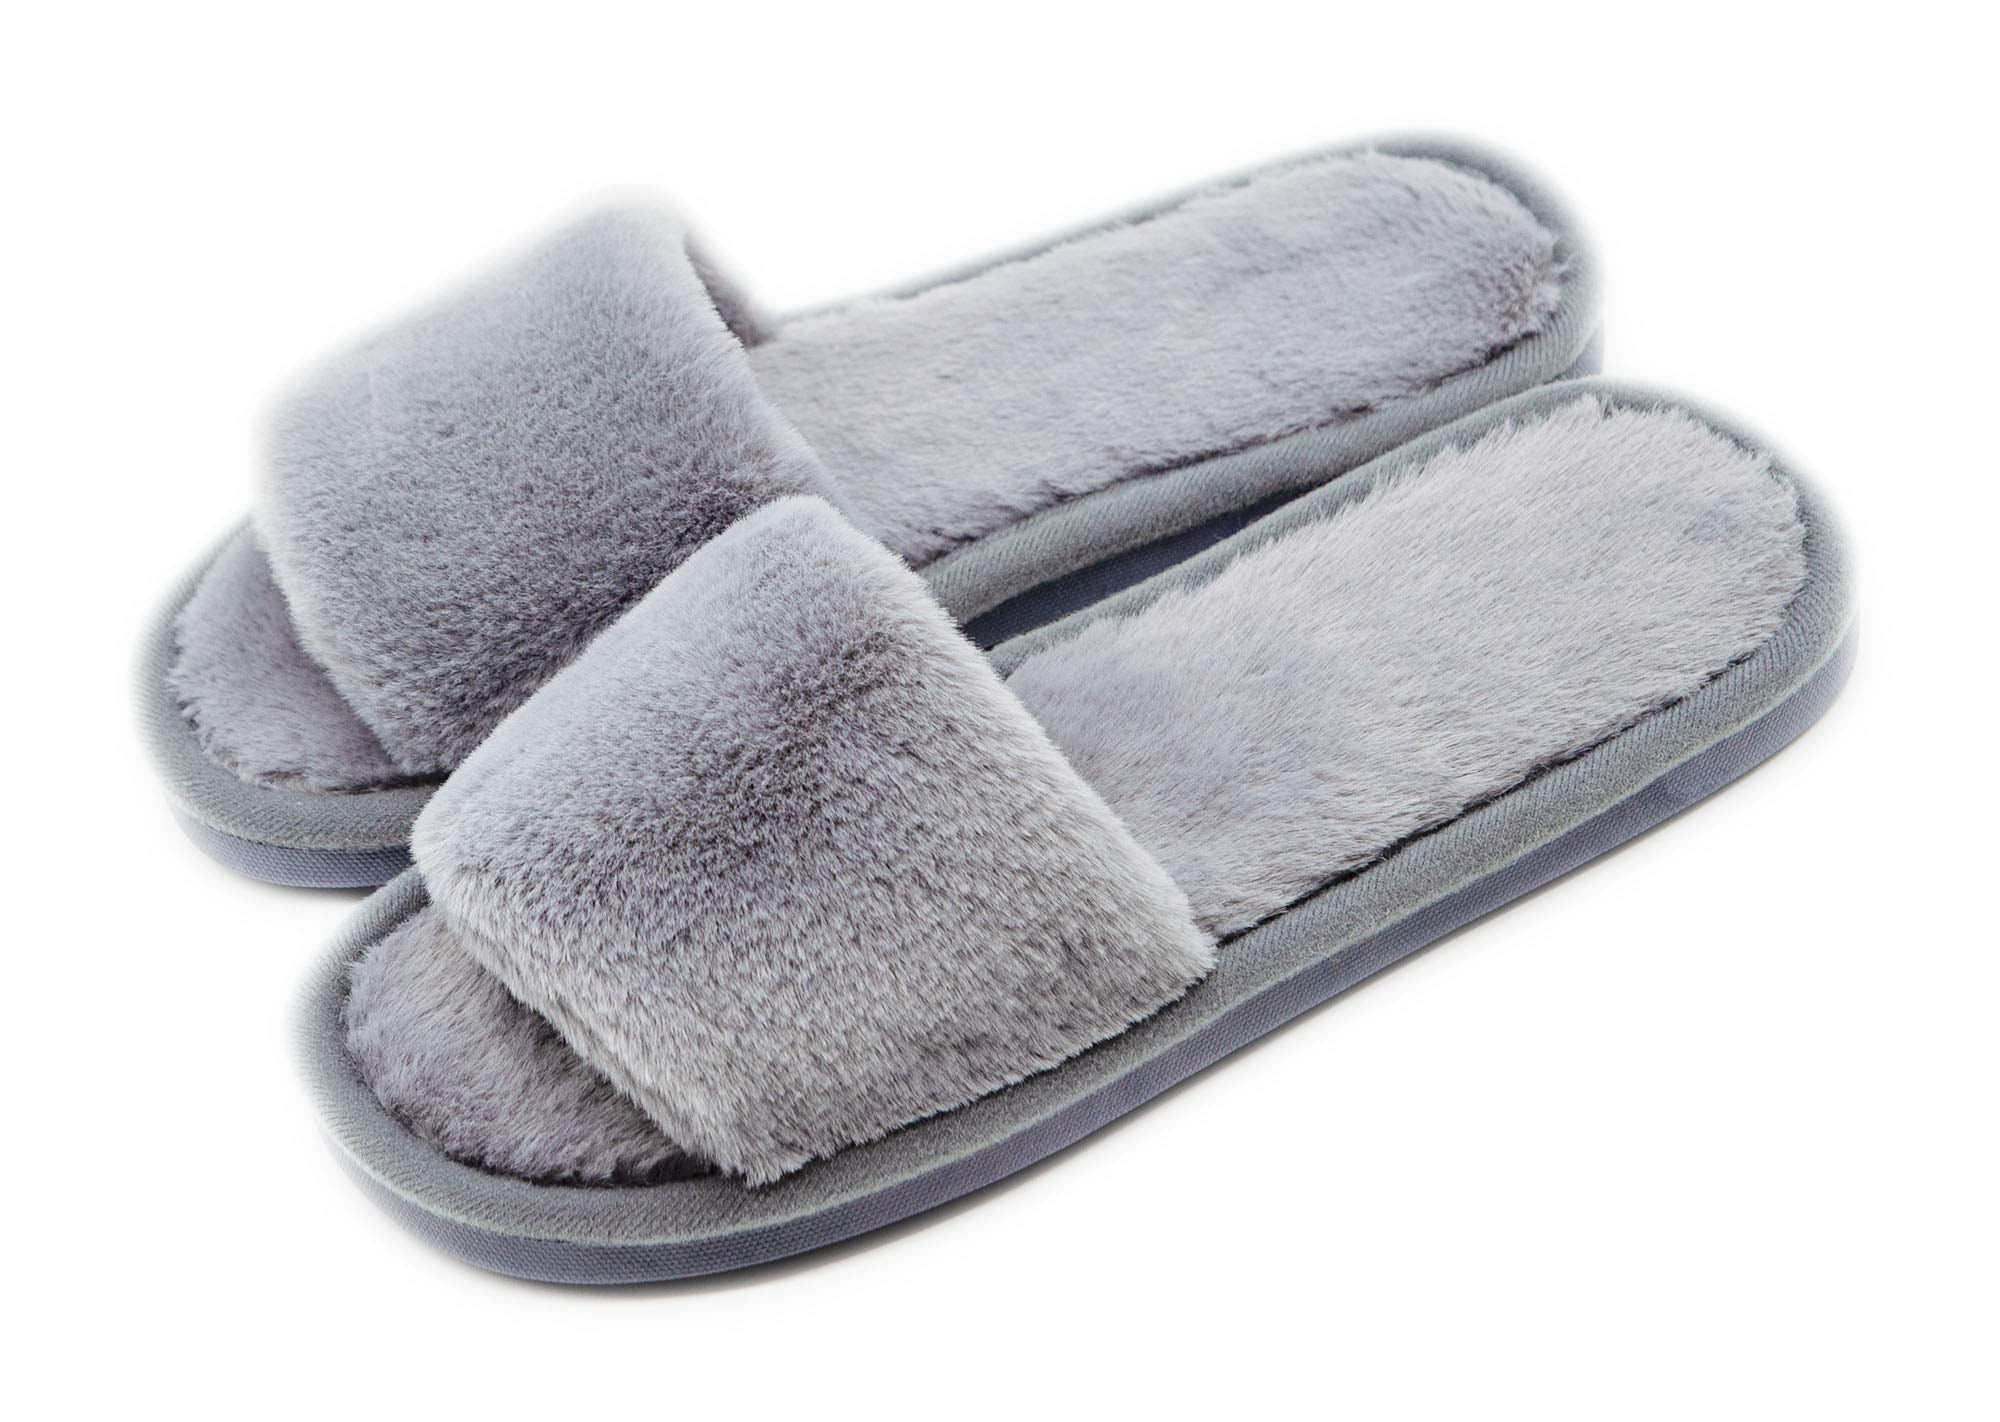 Crazy Lady Women's Fuzzy Fluffy Furry Fur Slippers Flip Flop Open Toe Cozy House Memory Foam Sandals Slides Soft Flat Comfy Anti-Slip Spa Indoor Outdoor Slip on